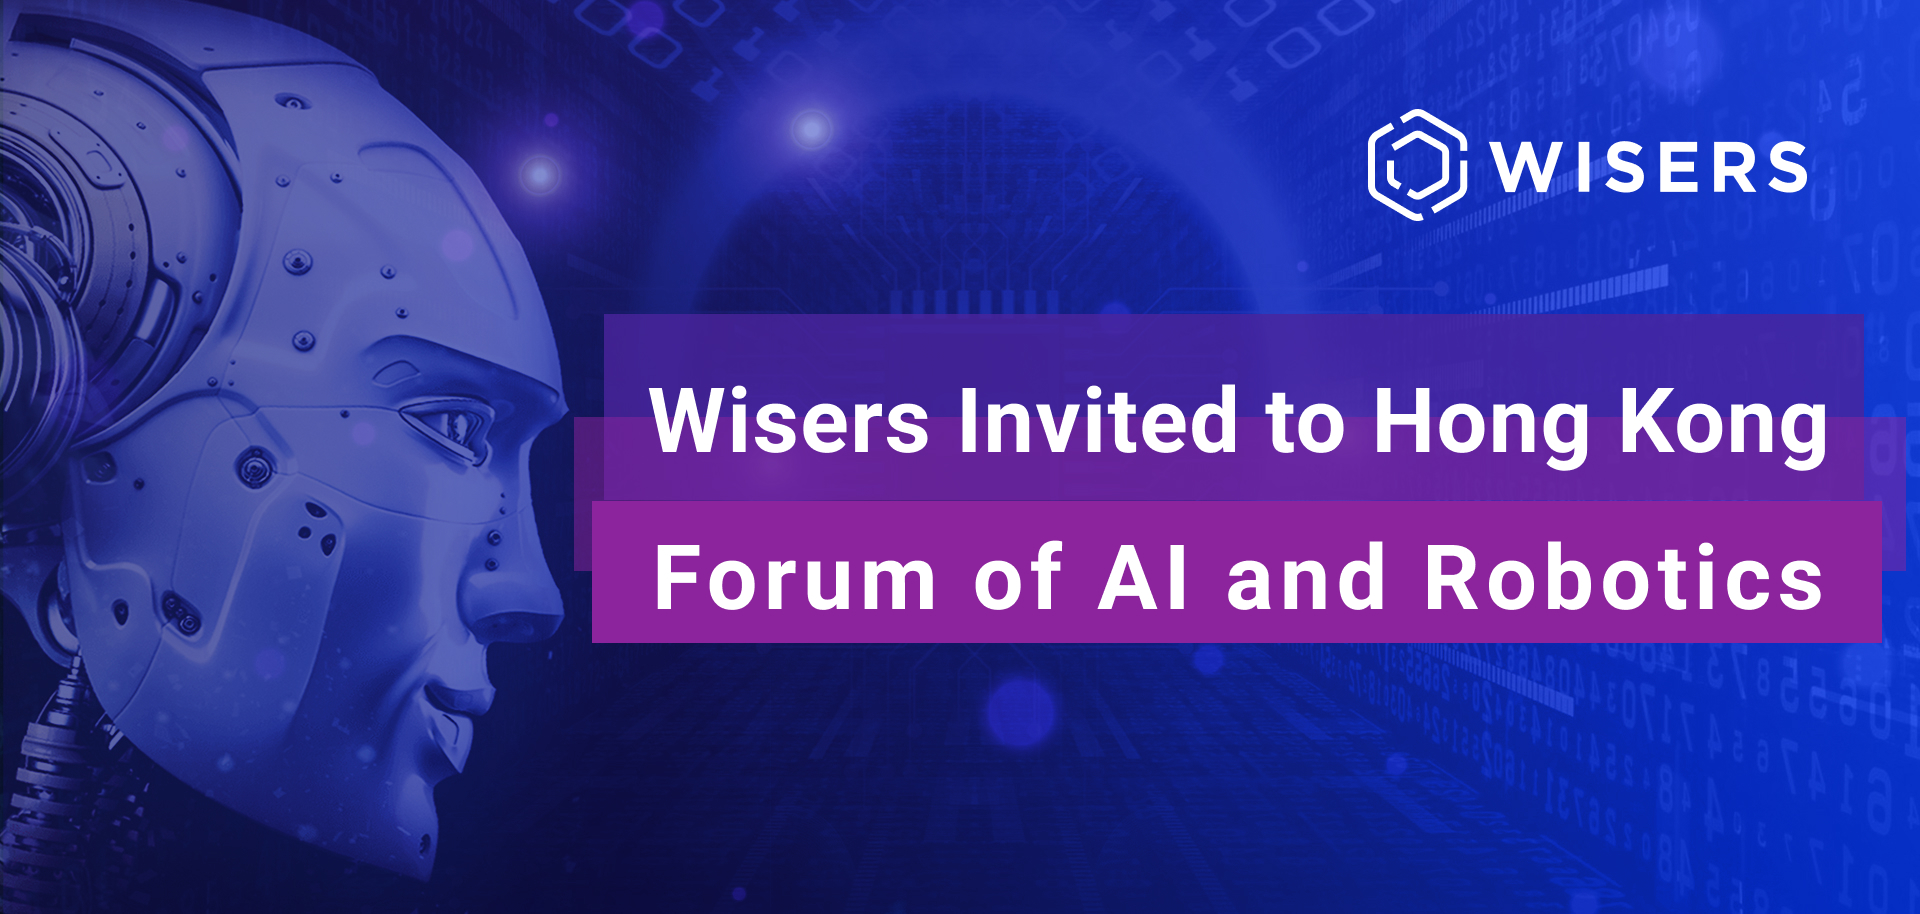 Wisers Information is Invited to Join Hong Kong Forum of AI and Robotics to Share Latest NLP Applications to Empower the Financial Industry